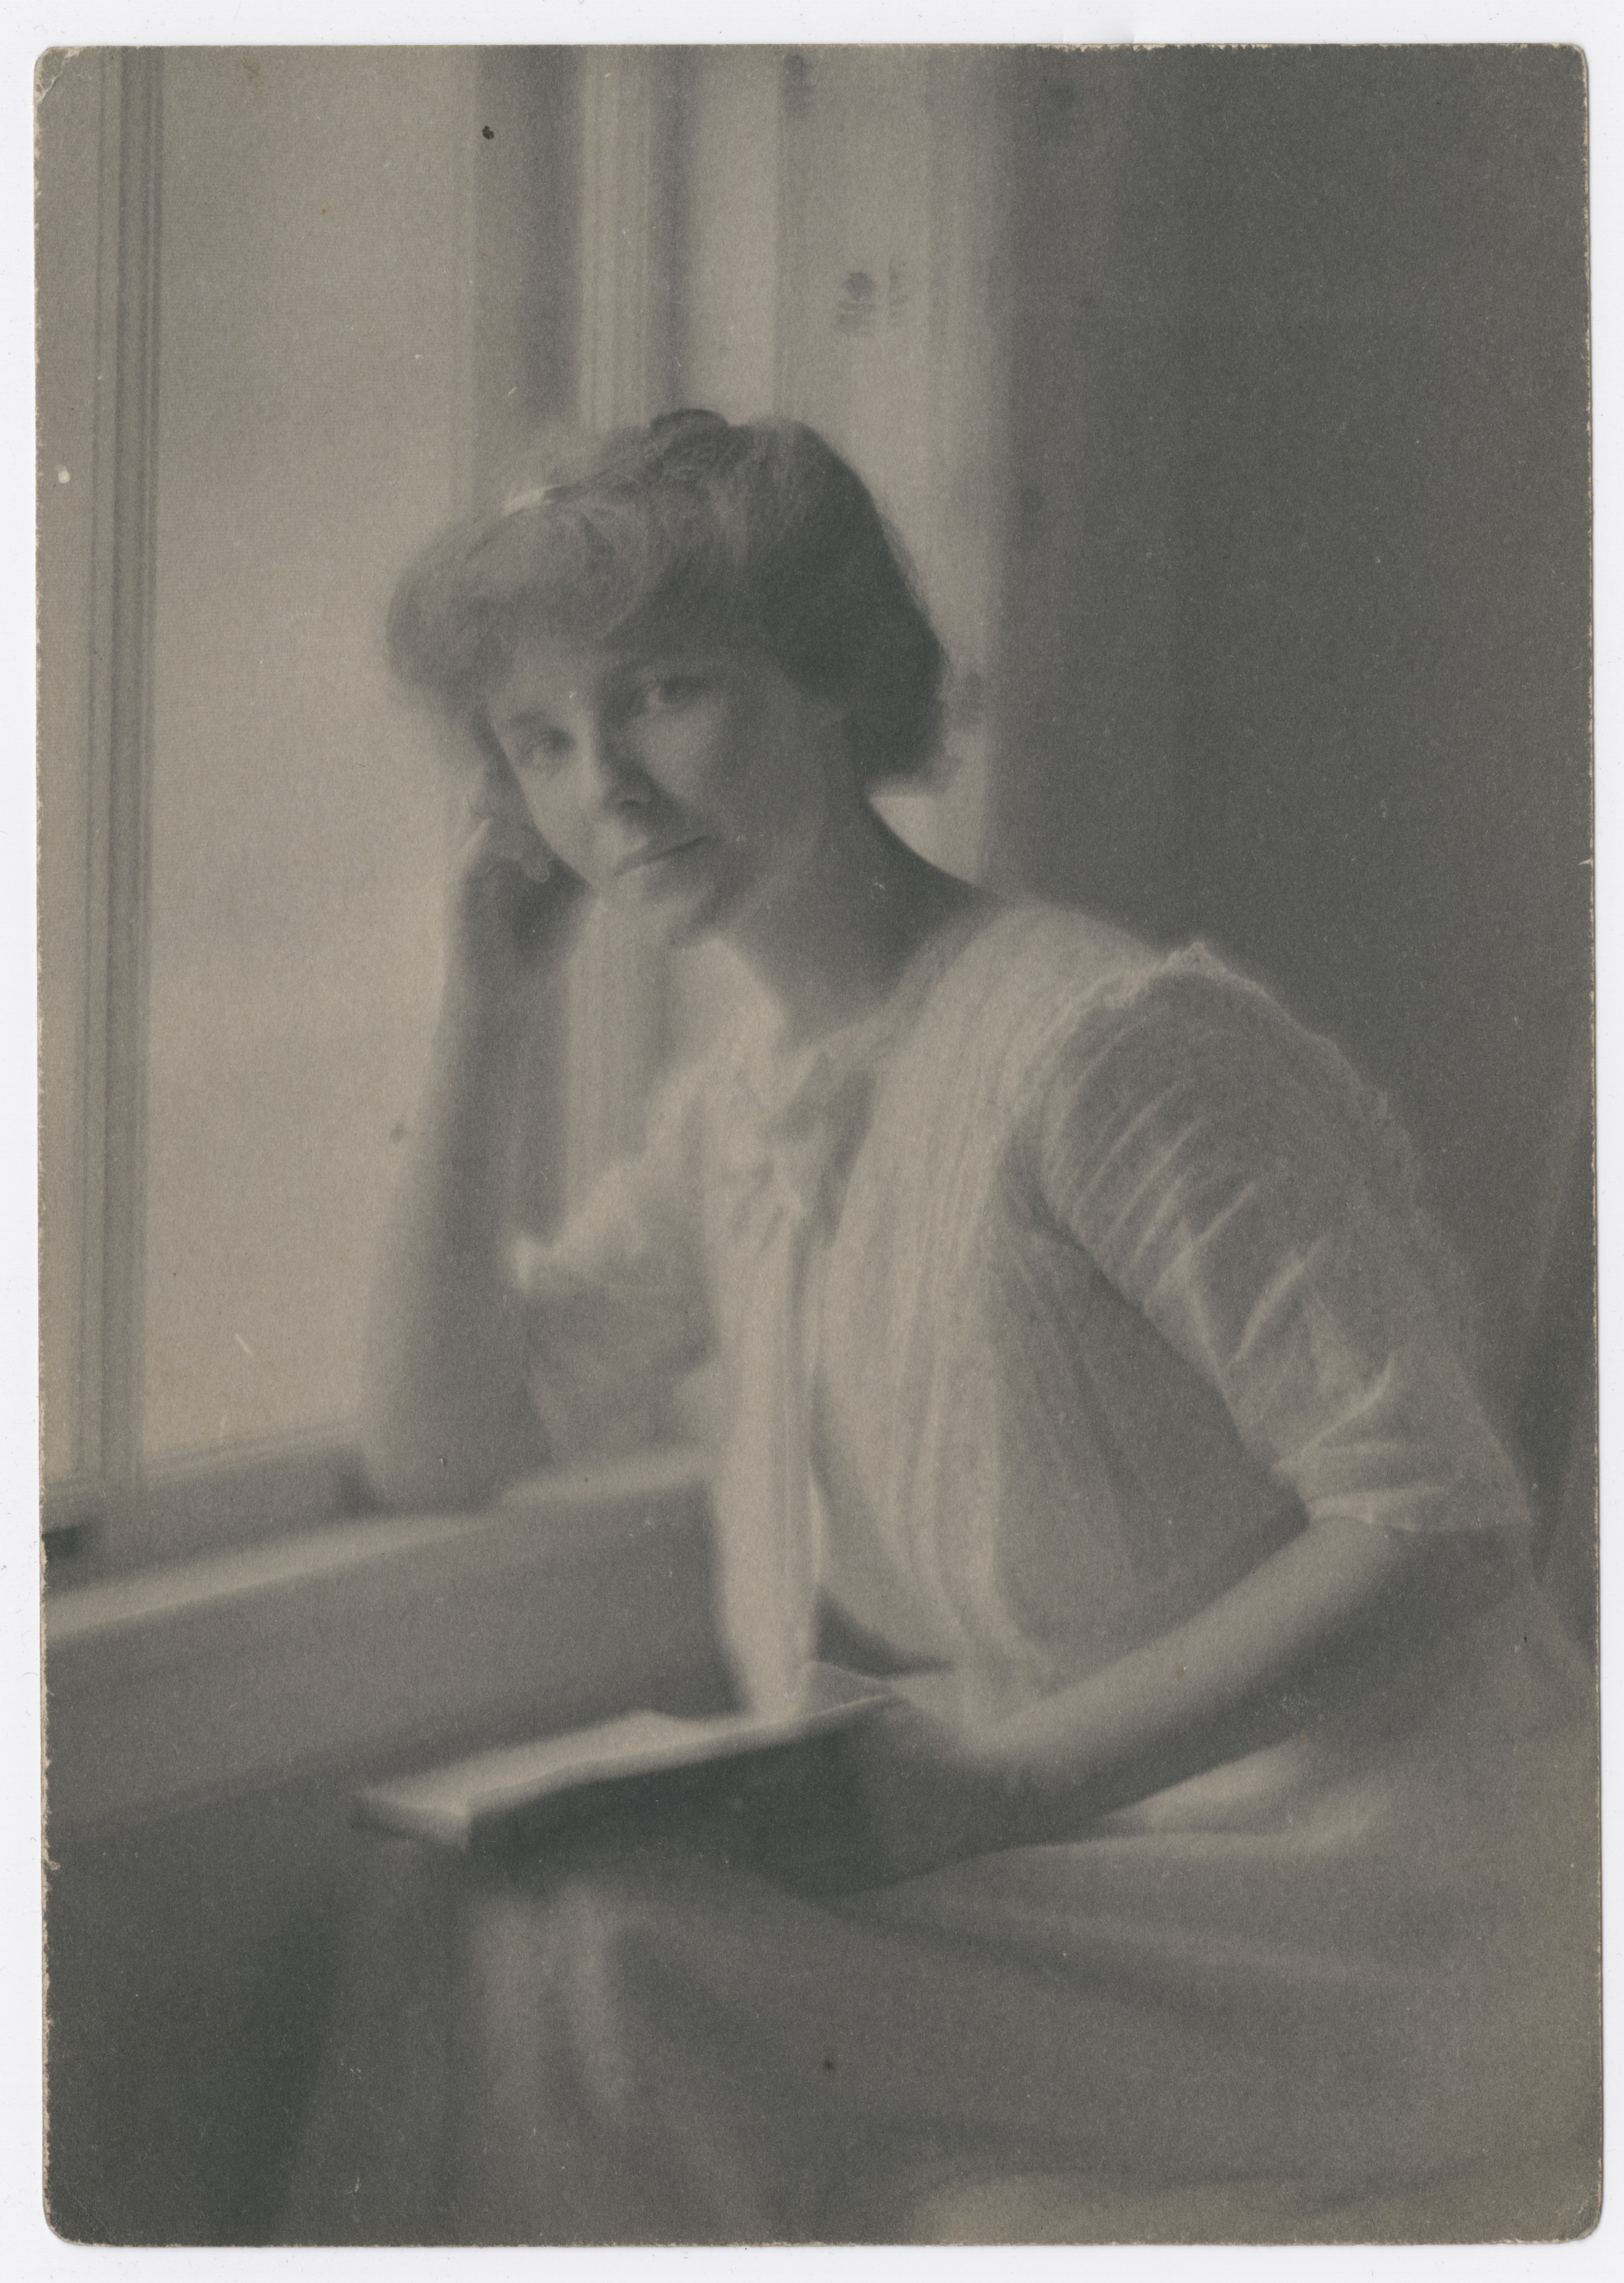 Photo of Lee taken by her first husband, Francis Watts Lee